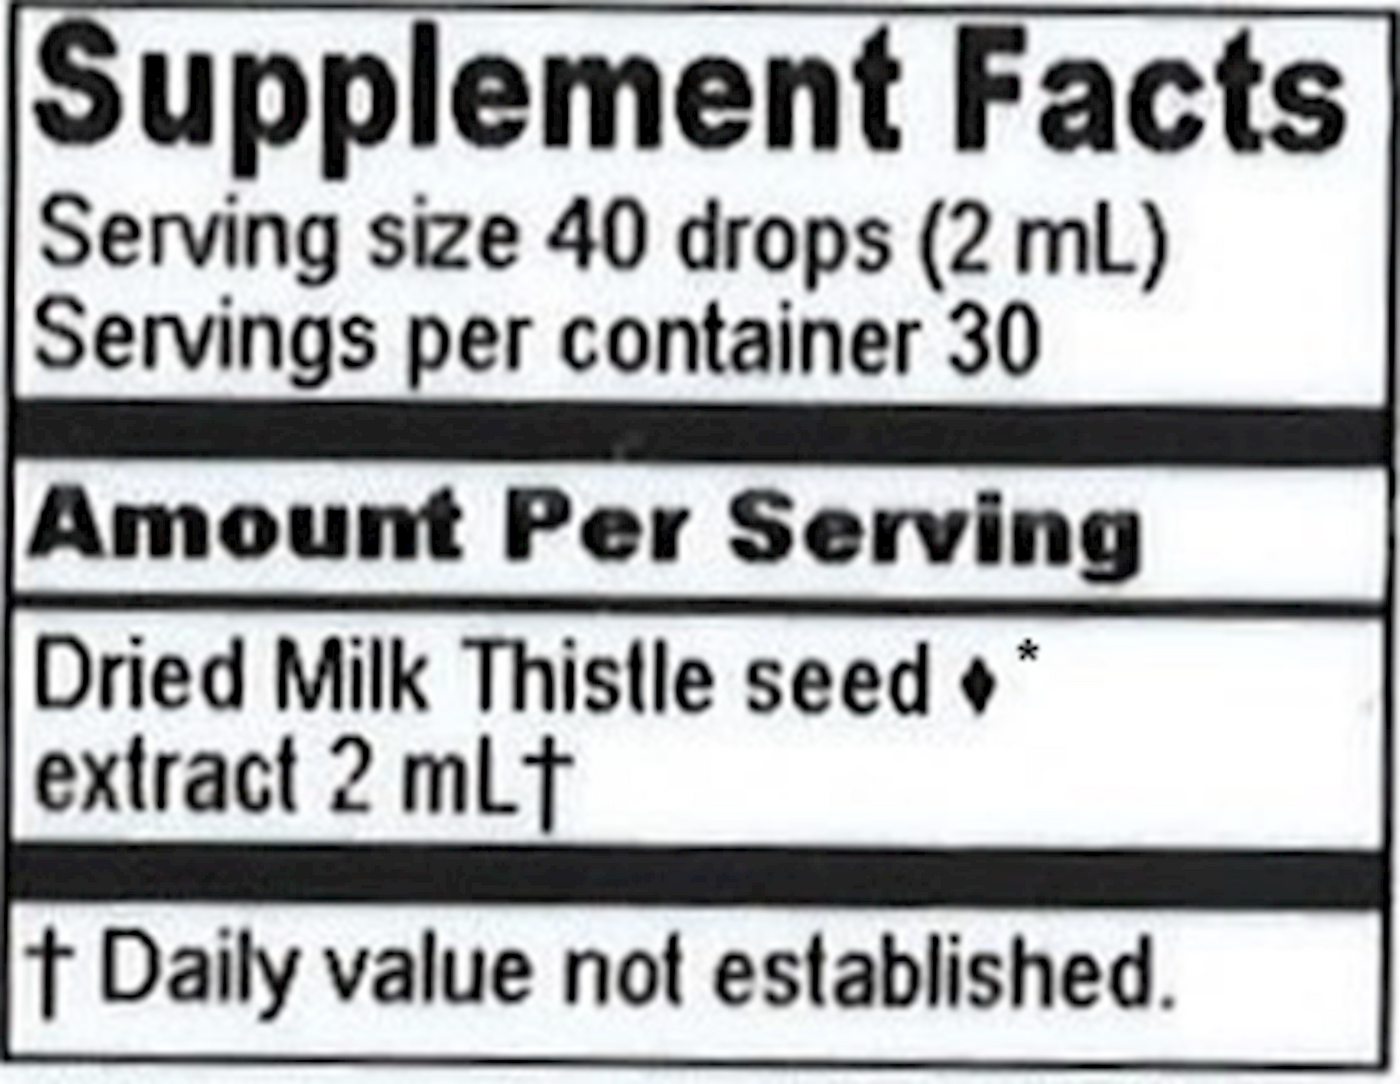 Milk Thistle Extract  Curated Wellness